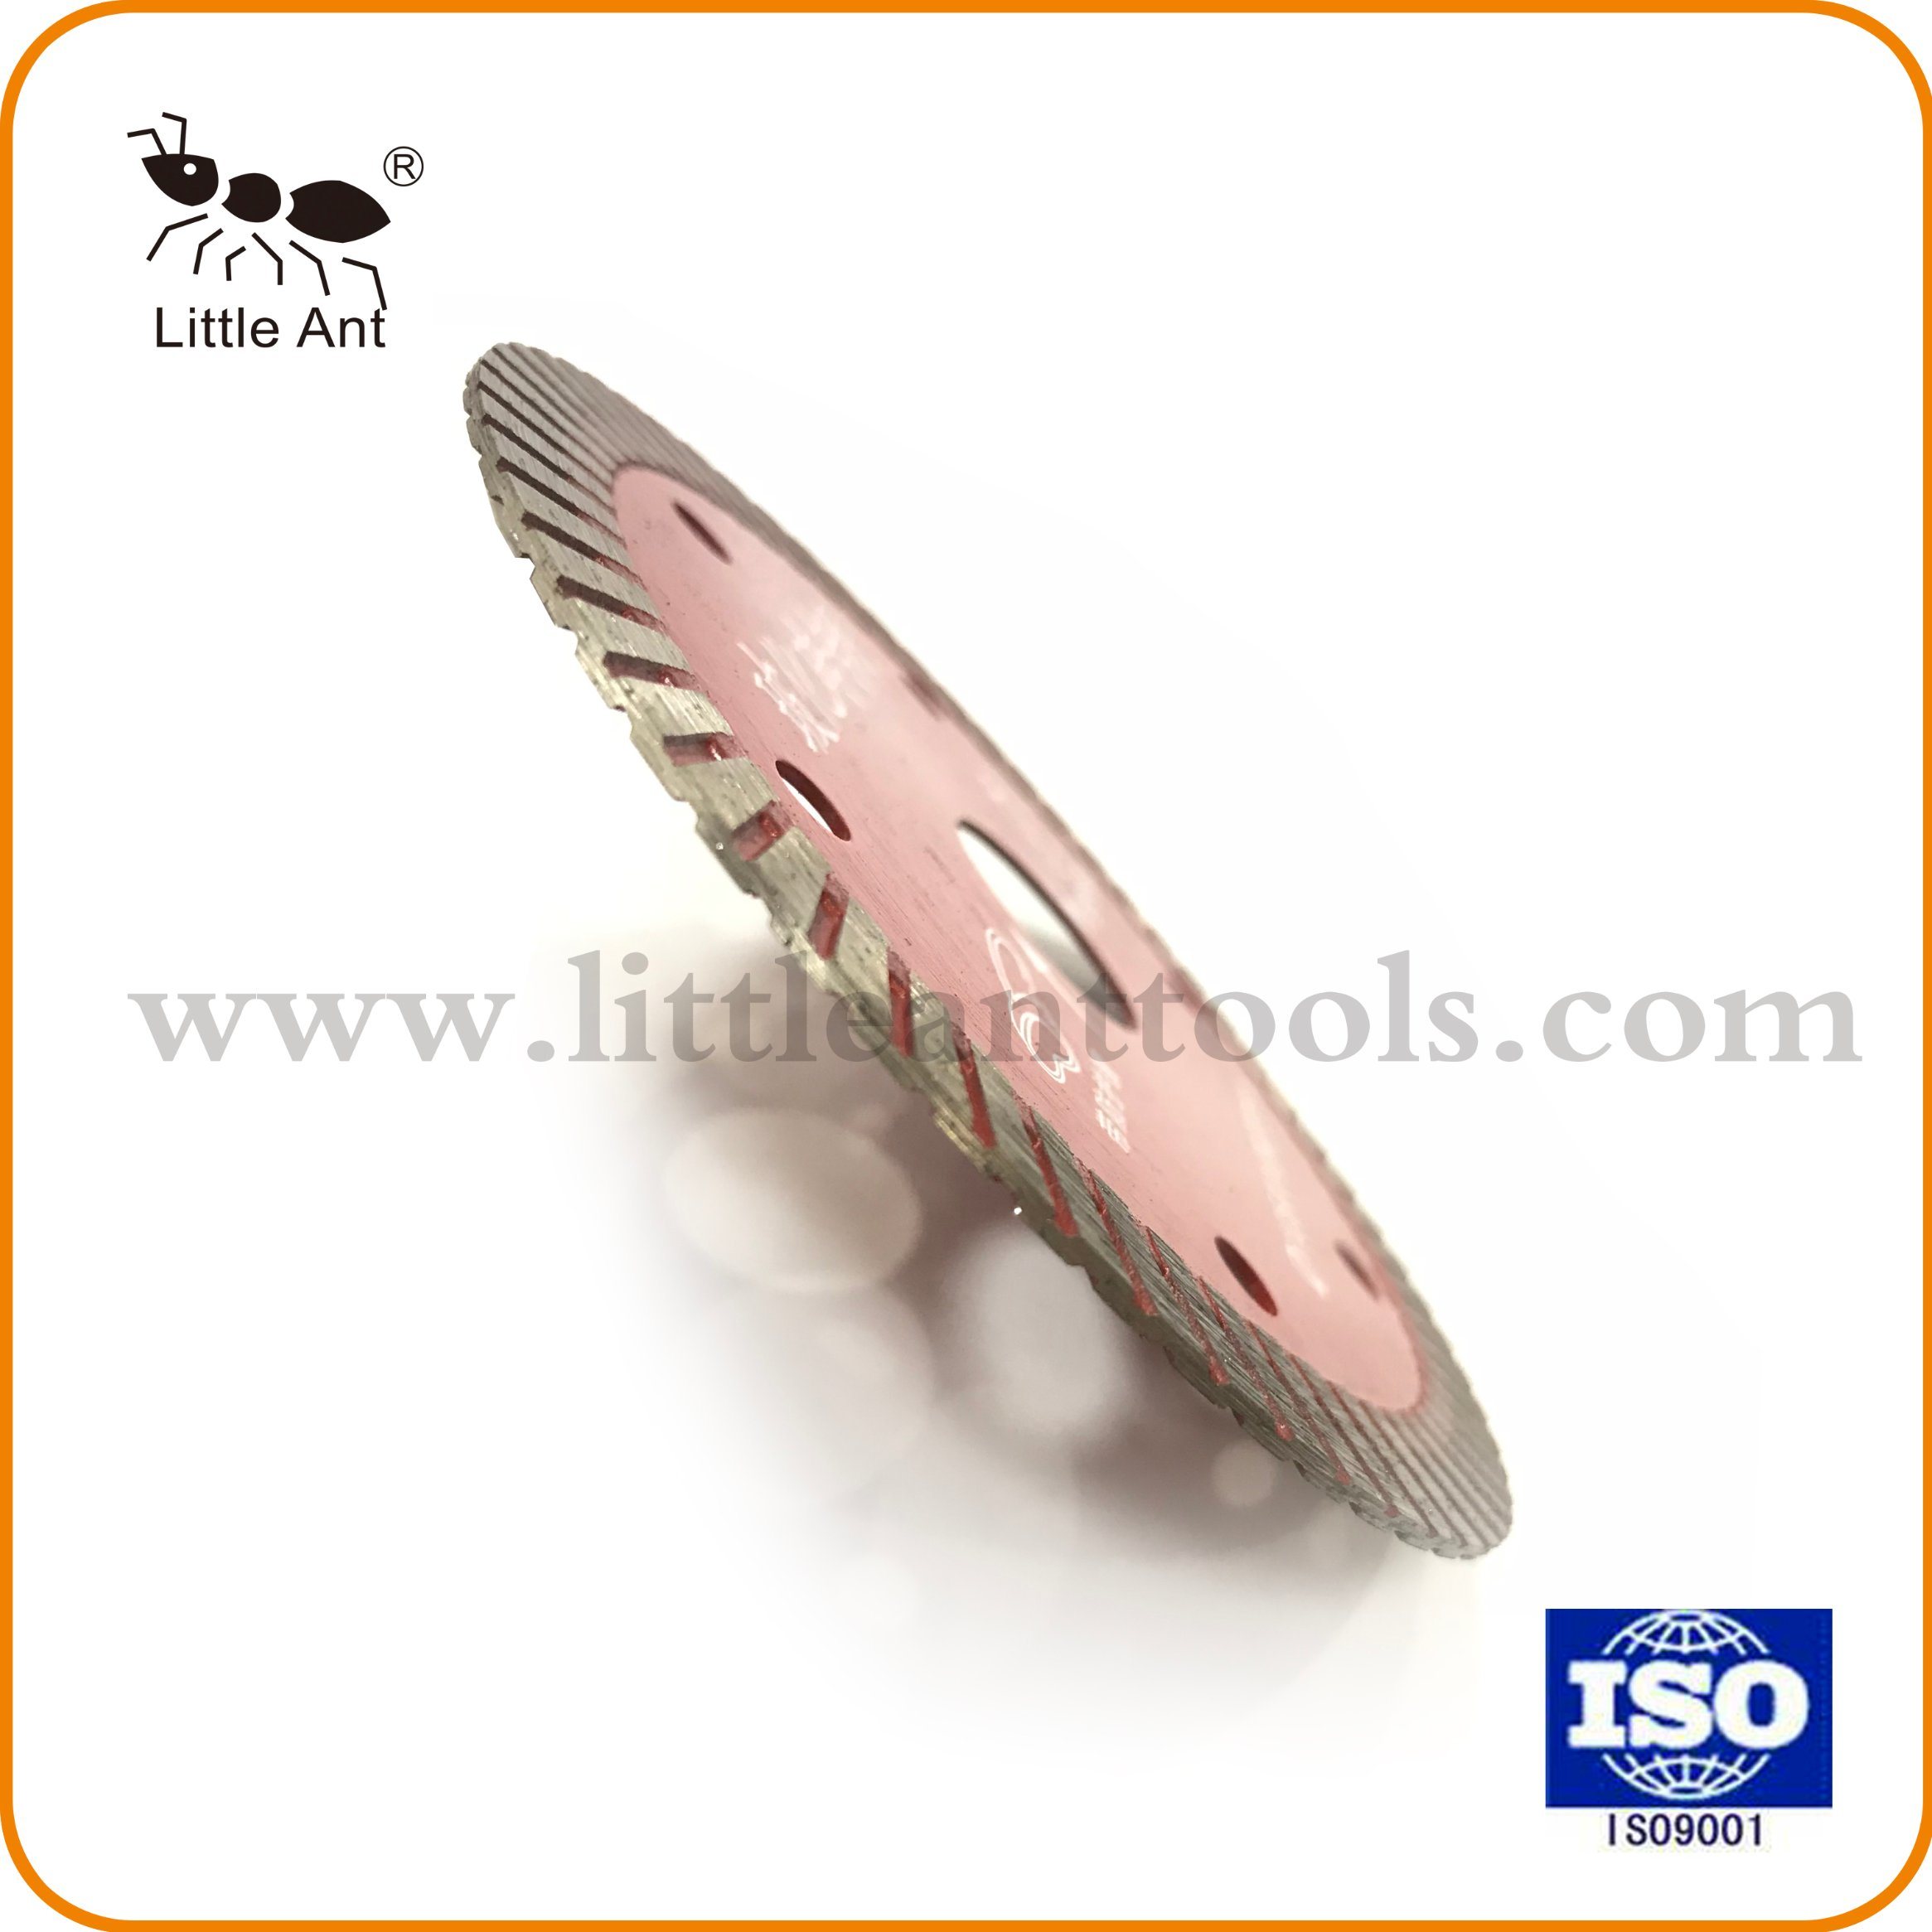 105mm Diamond Saw Blade Used for Different Kinds of Tiles